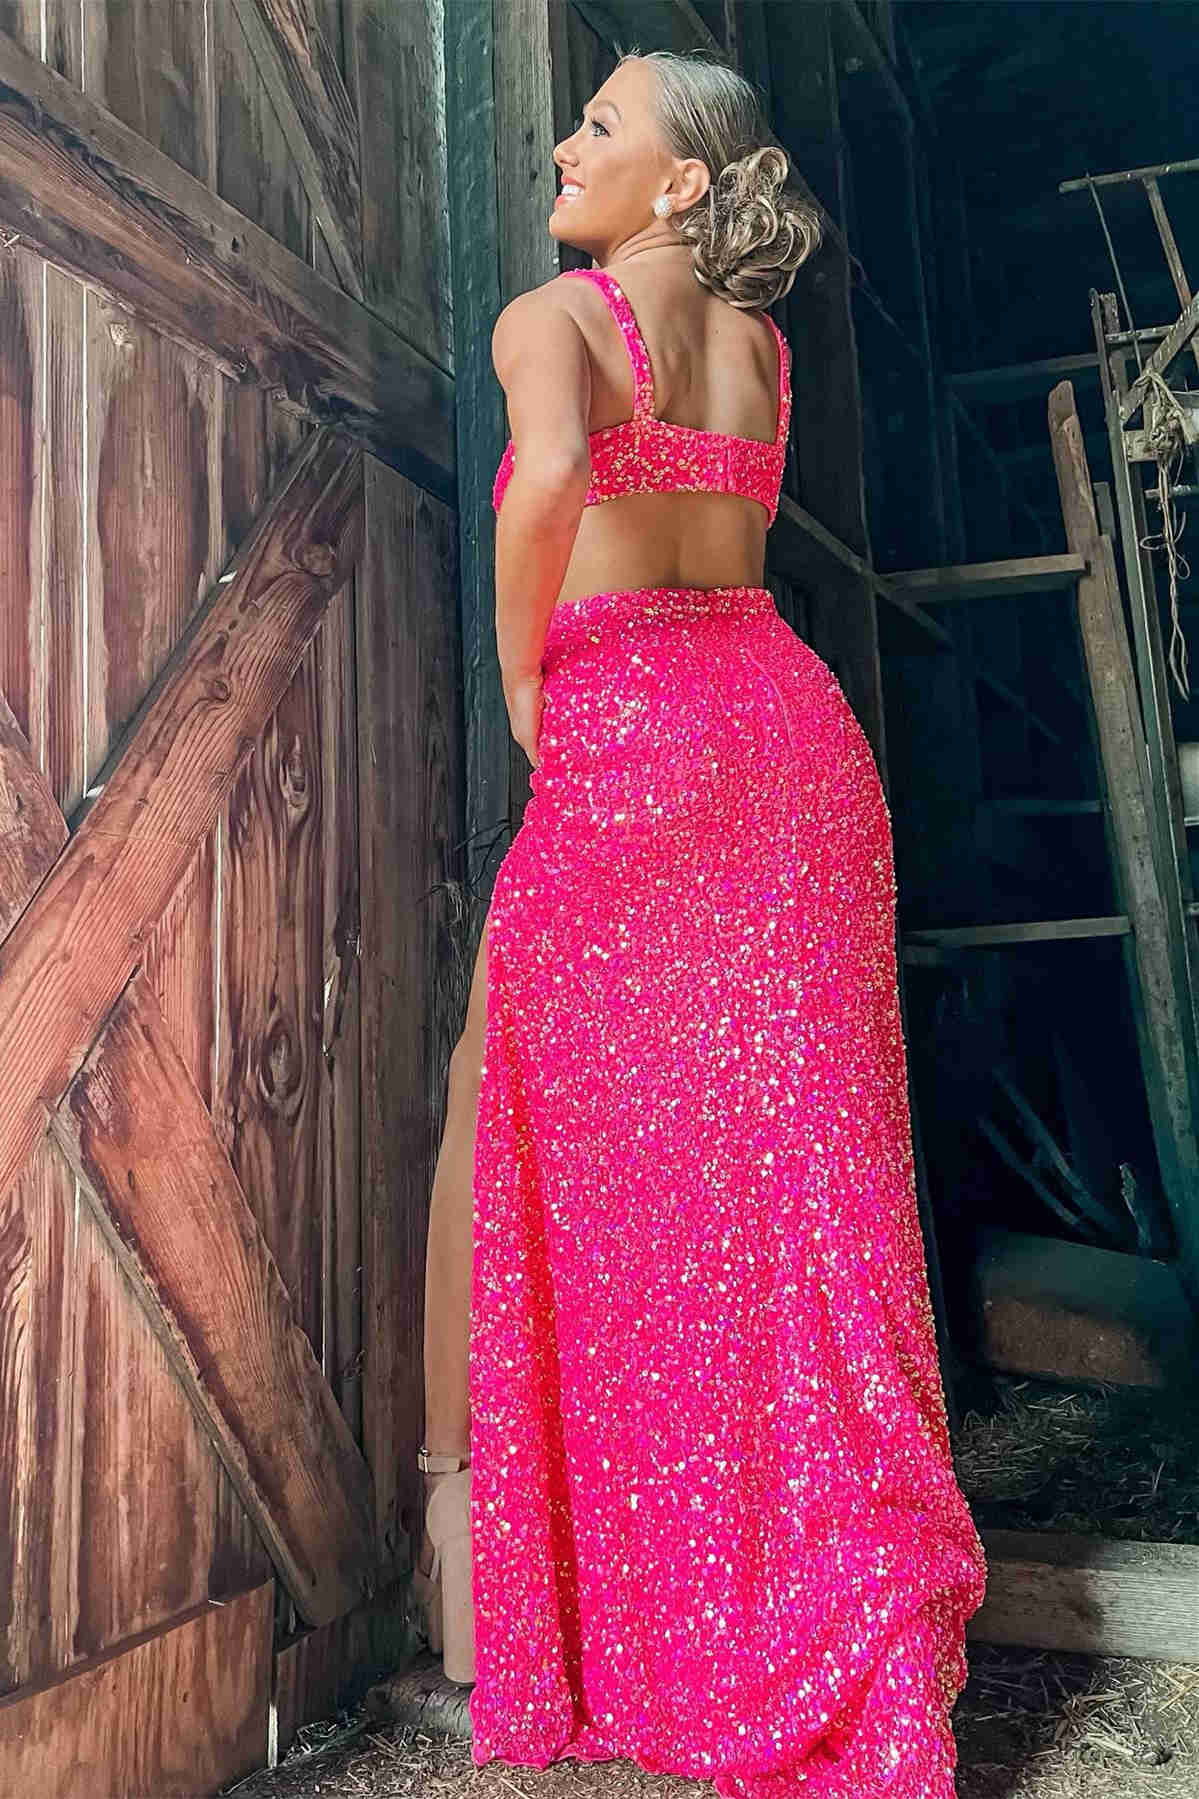 V-Neck Cut Out Hot Pink Sequined Prom Dress with Slit, Backless Evening Gown GP399